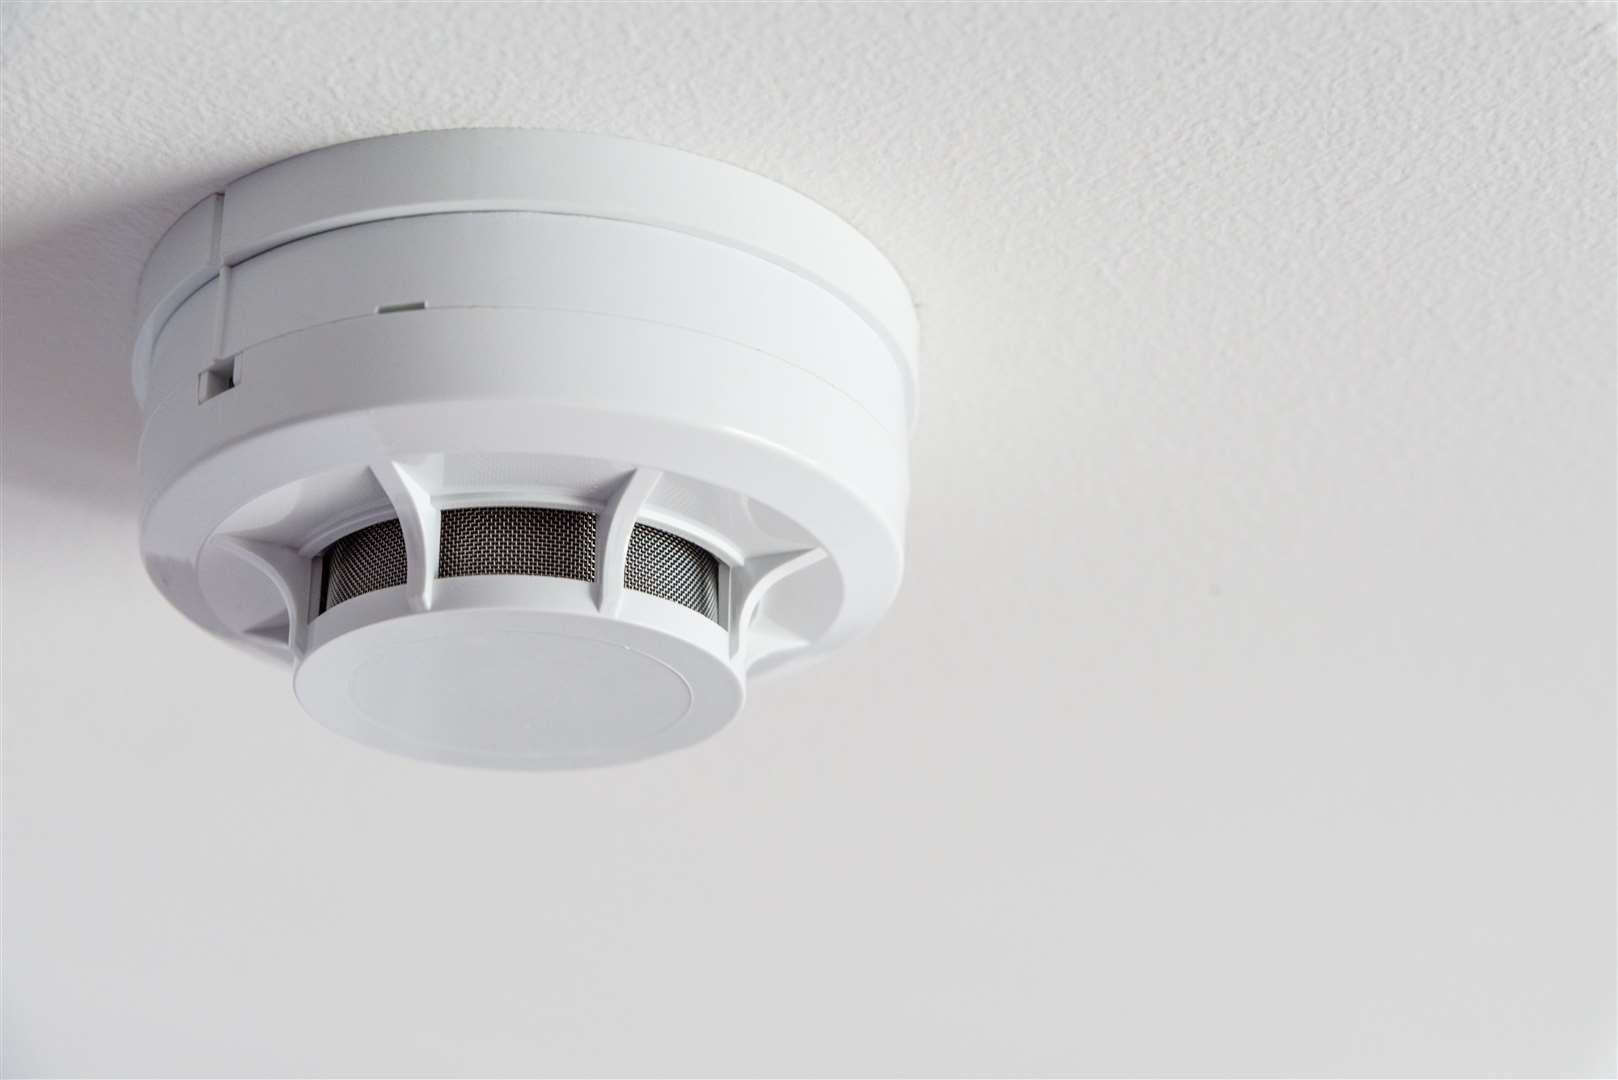 Fire alarms will need to be interlinked from February 2022.